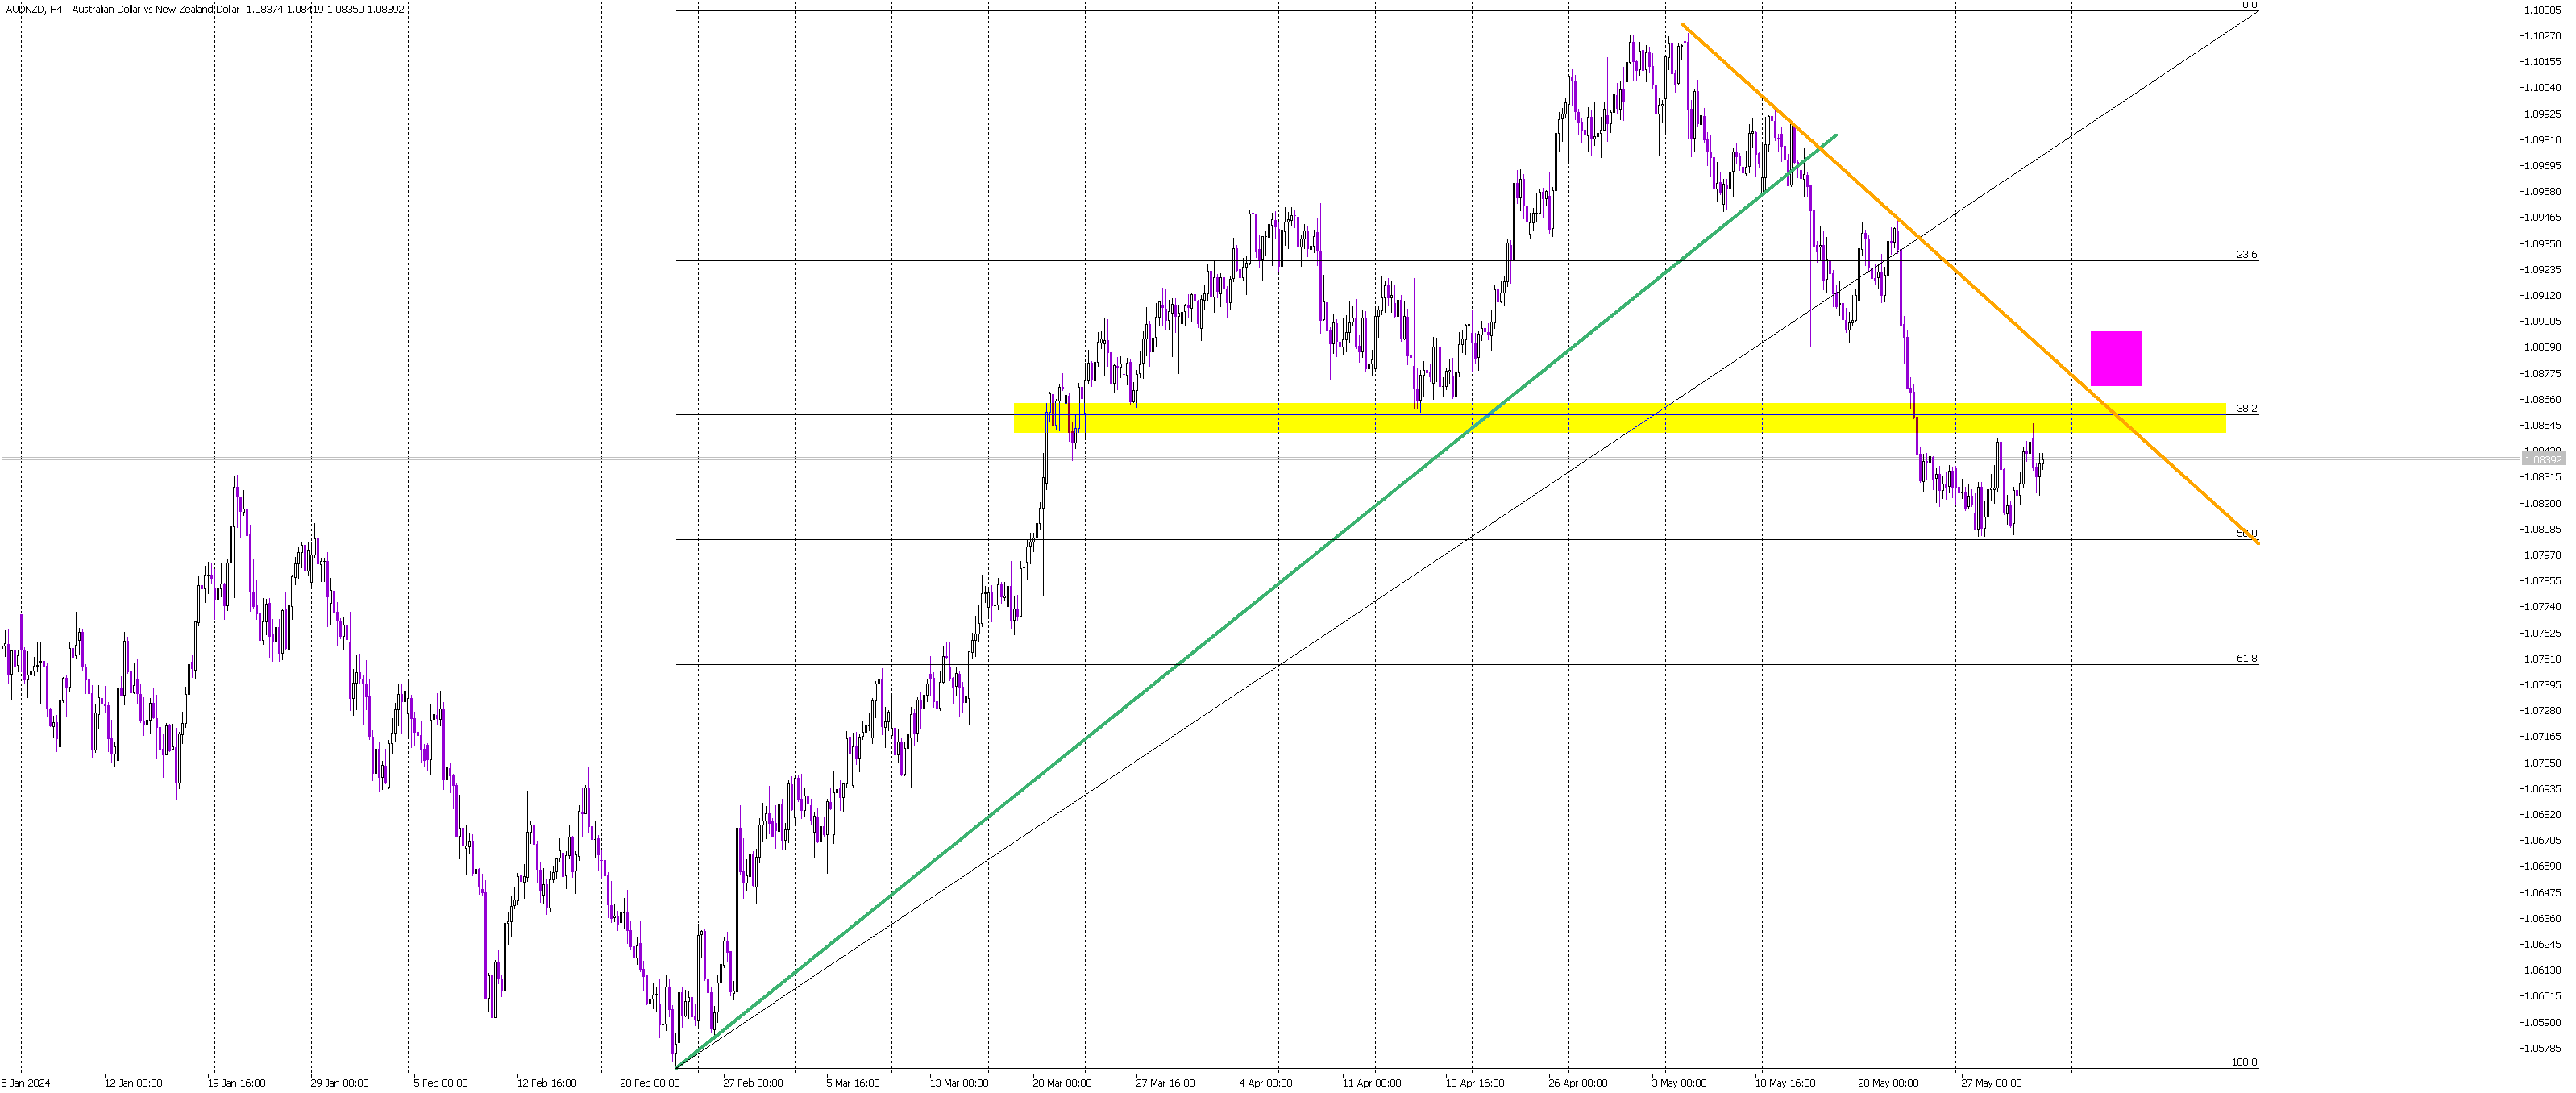 AUD/NZD Sideways Trend and Potential Breakout